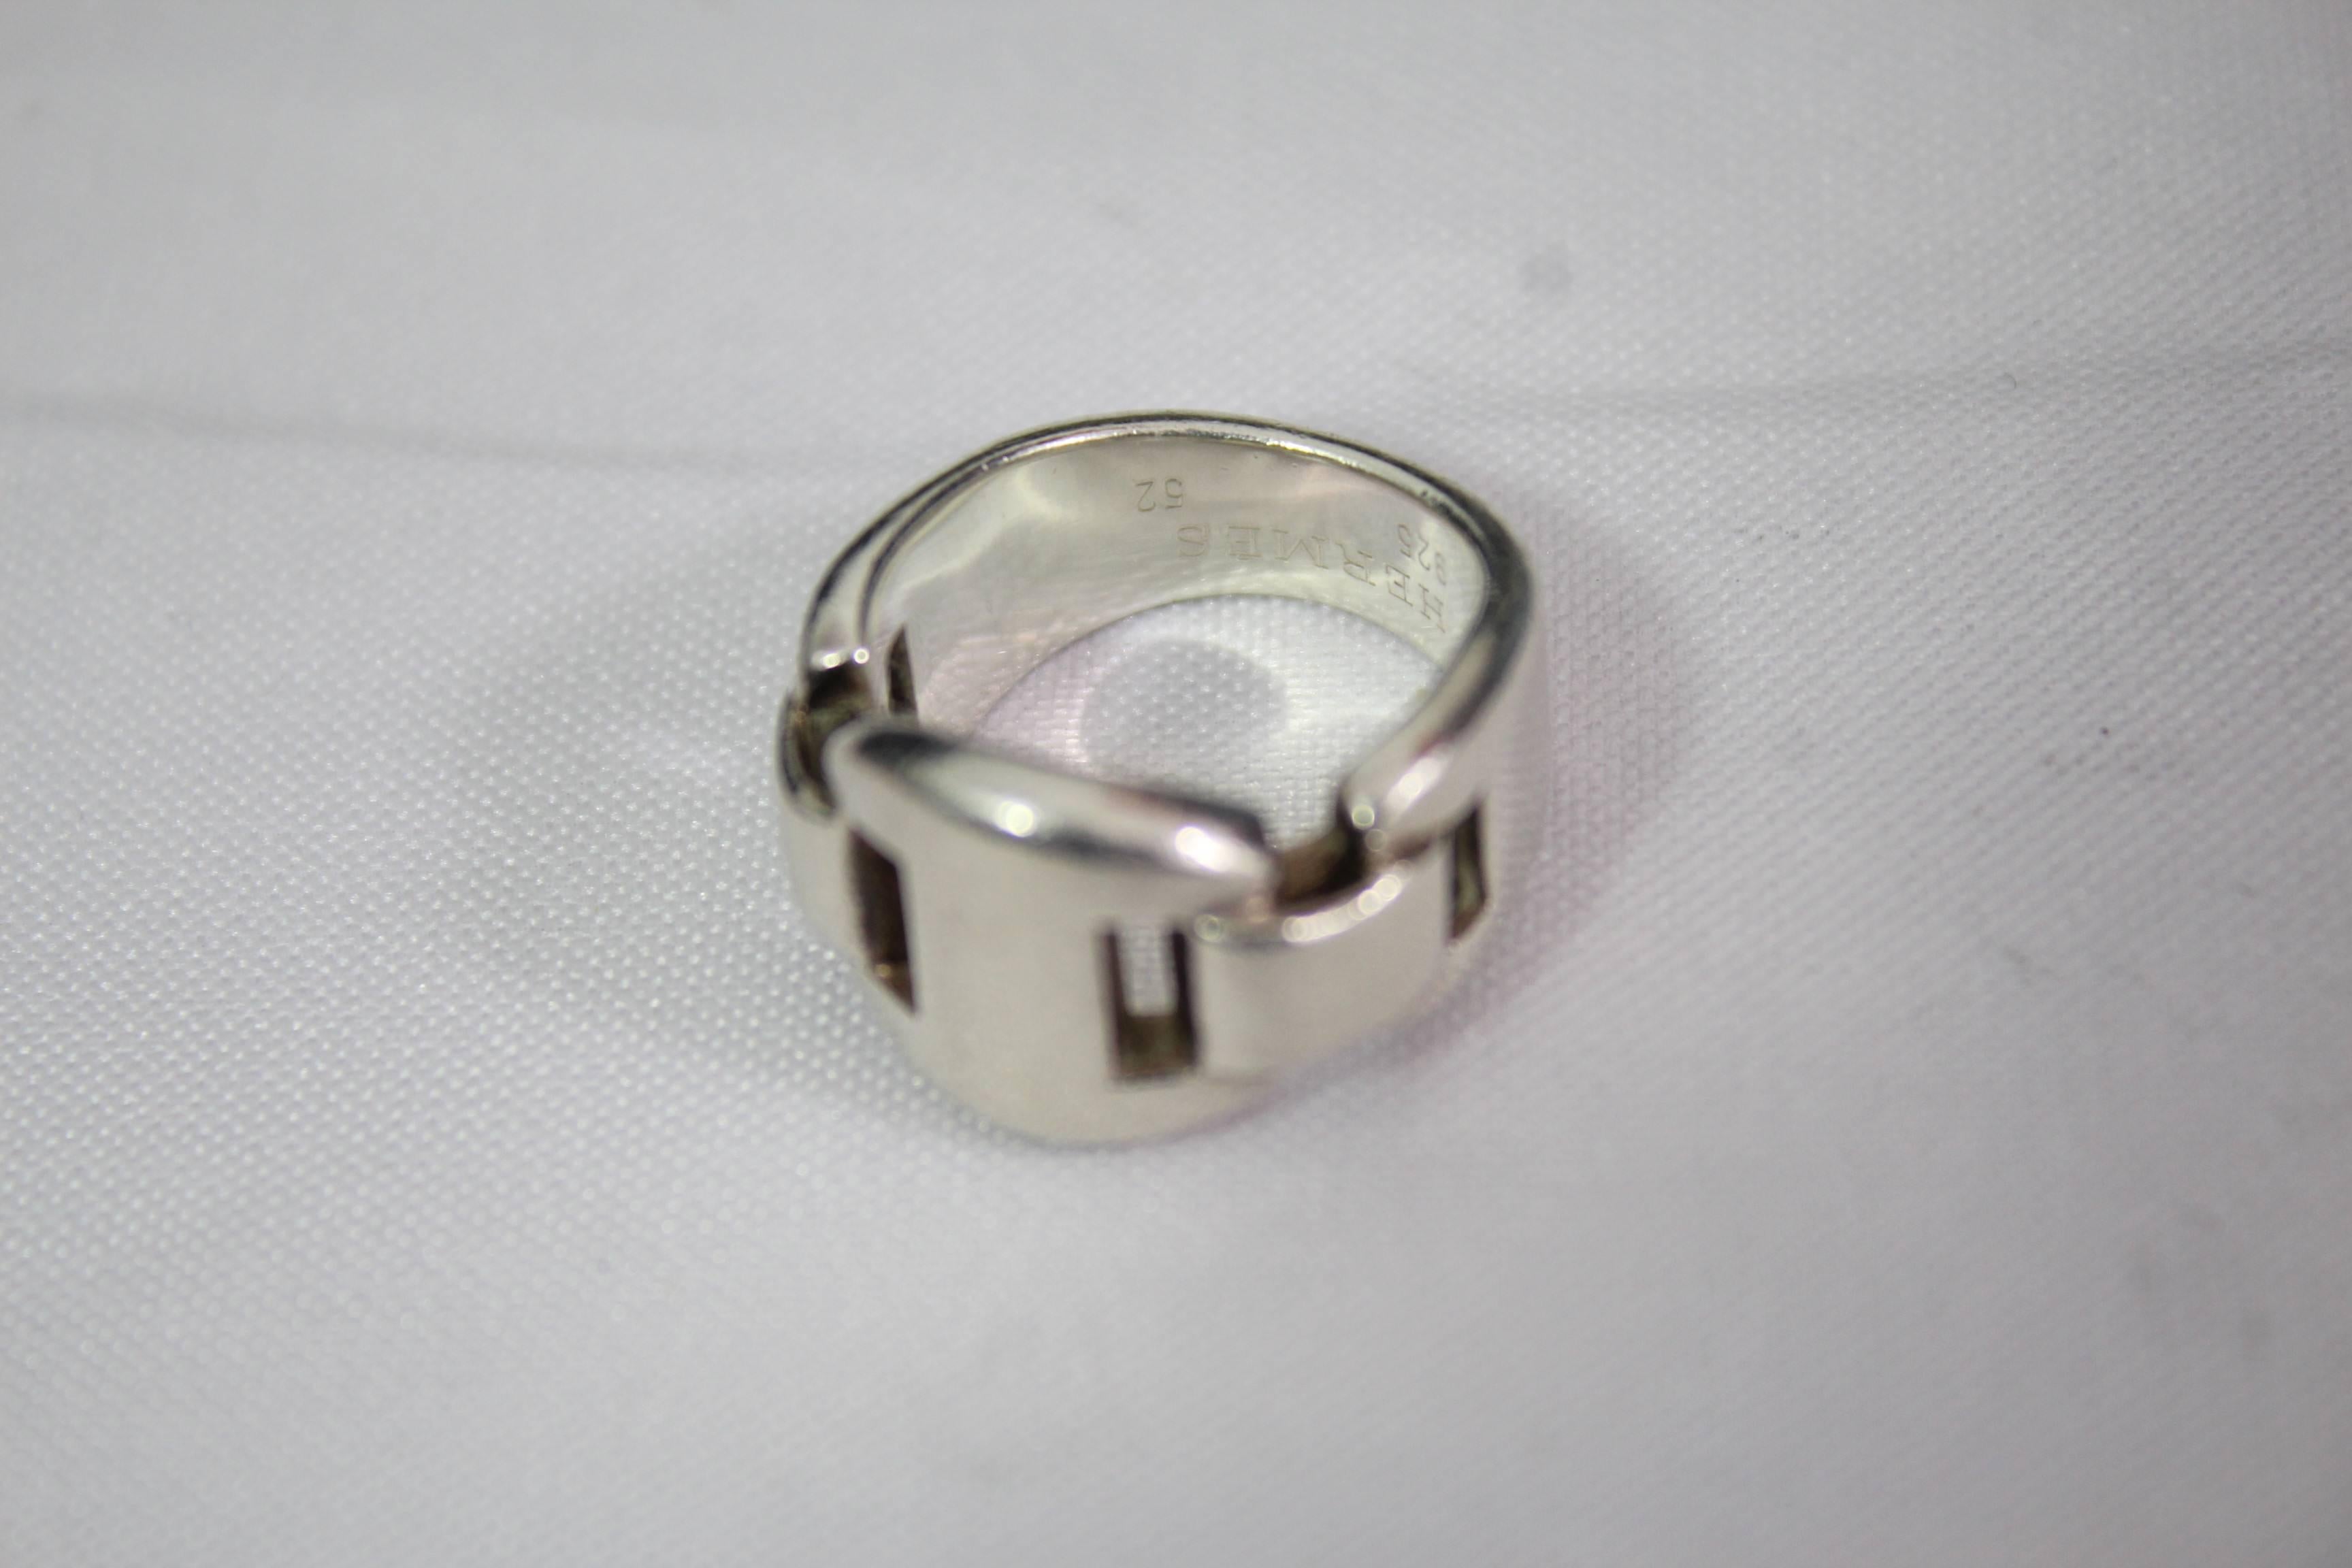 Hermes ring in sterling silver. Size french 52

good condition, some small signs of wear